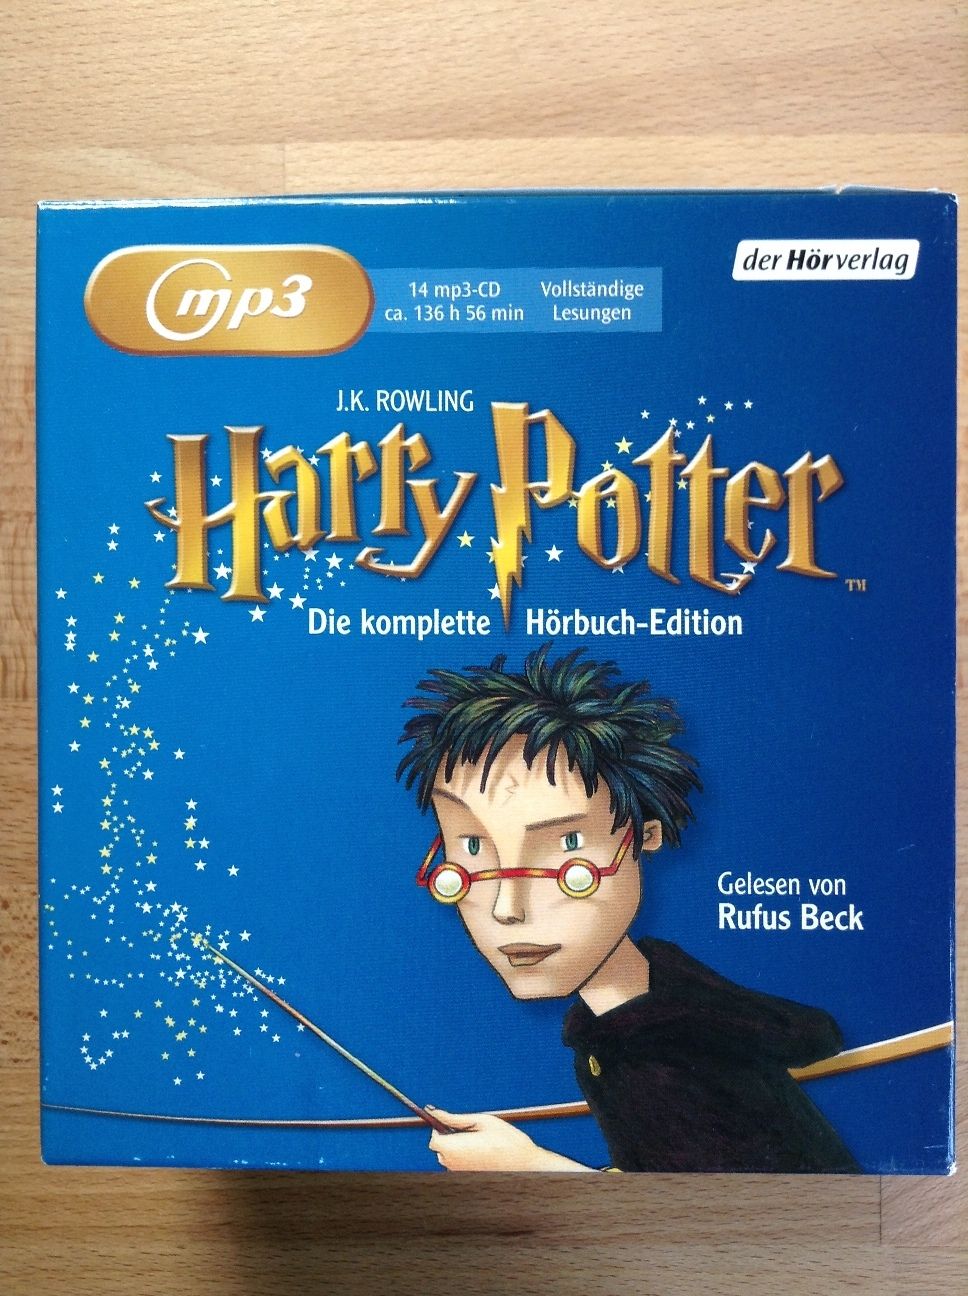 Harry Potter - Die komplette Hörbuch-Edition - MP3